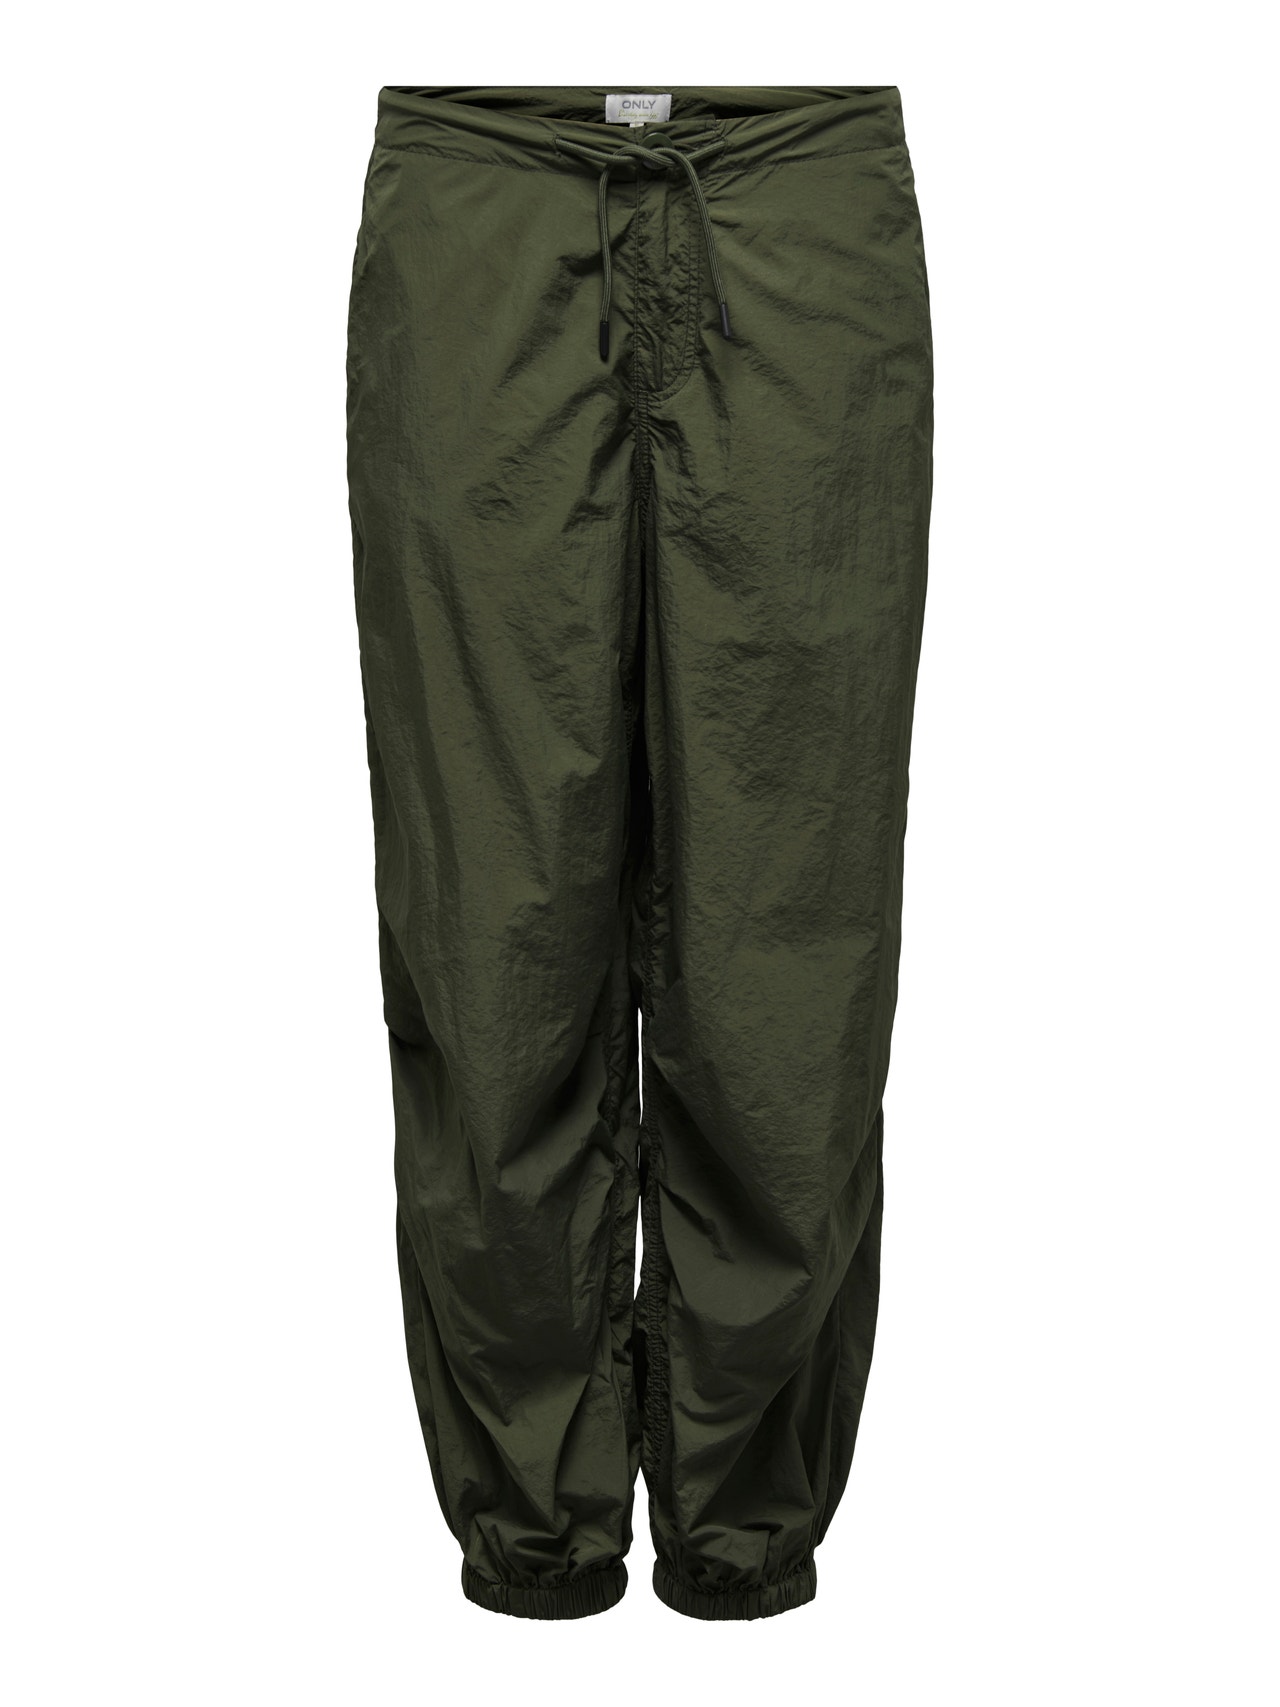 ONLY Loose fit pants -Olive Night - 15295049